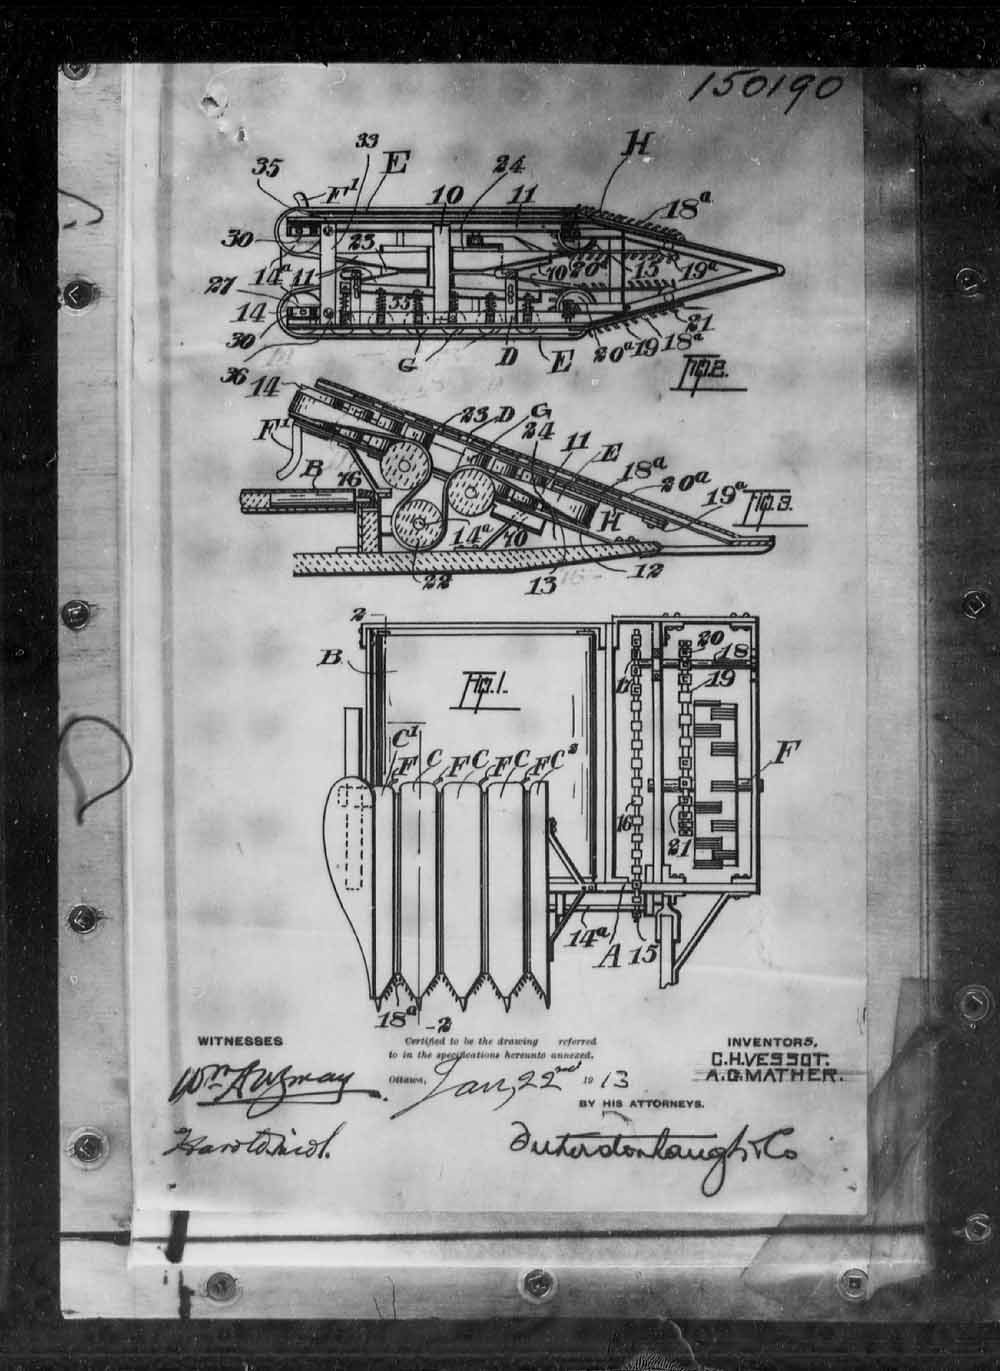 Digitized page of Canadian Patents, 1869-1919 for Image No.: e005603433